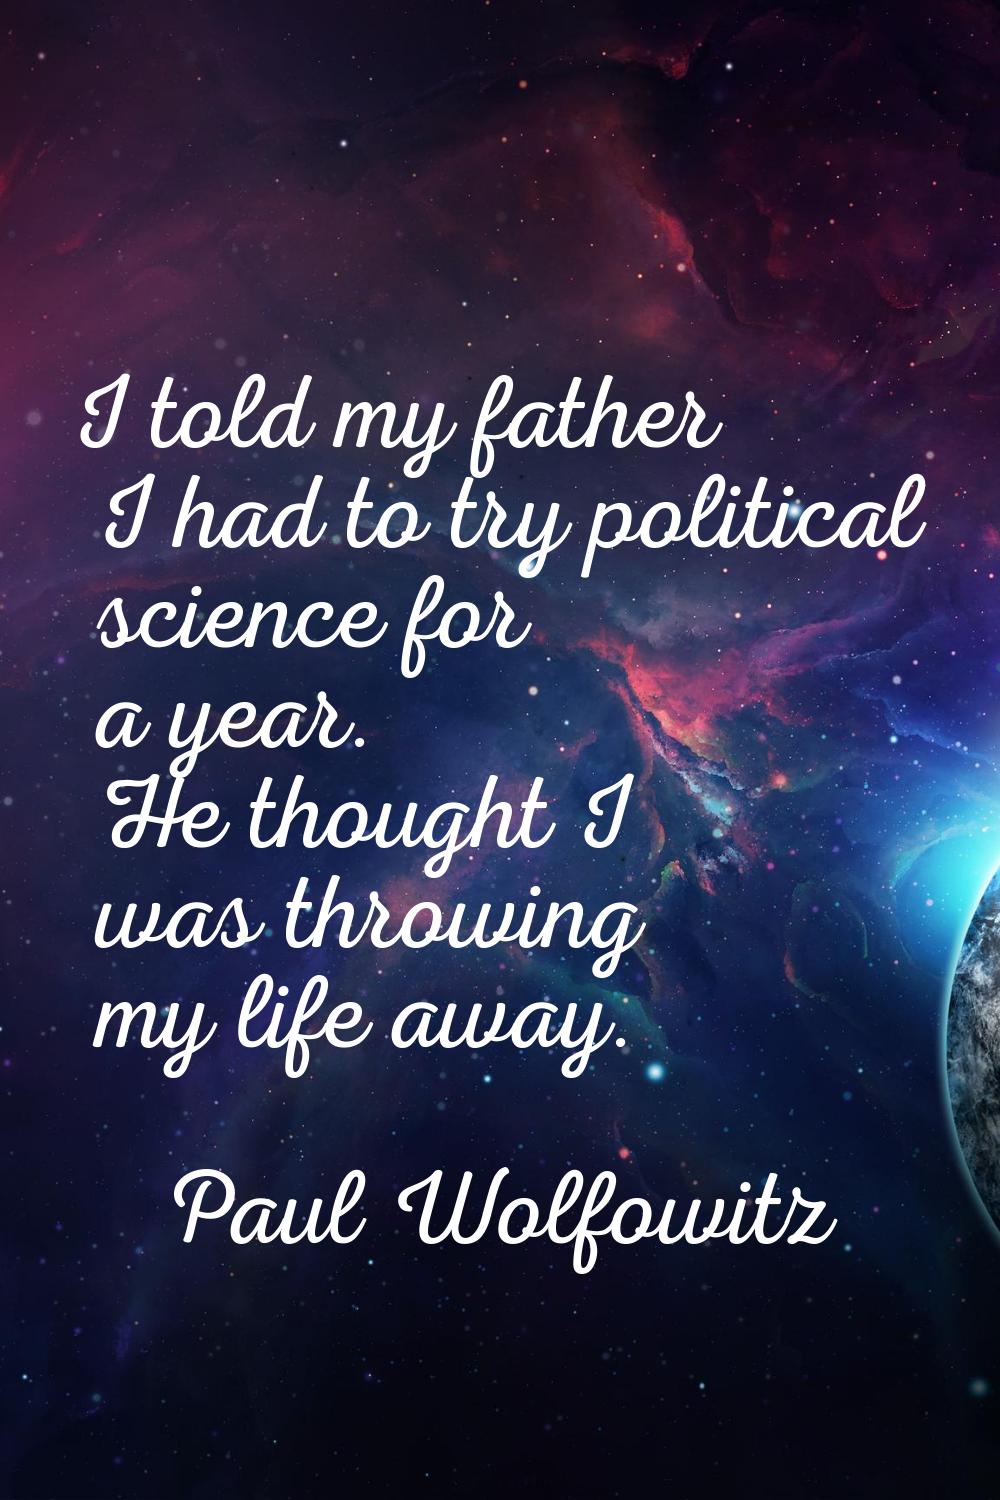 I told my father I had to try political science for a year. He thought I was throwing my life away.